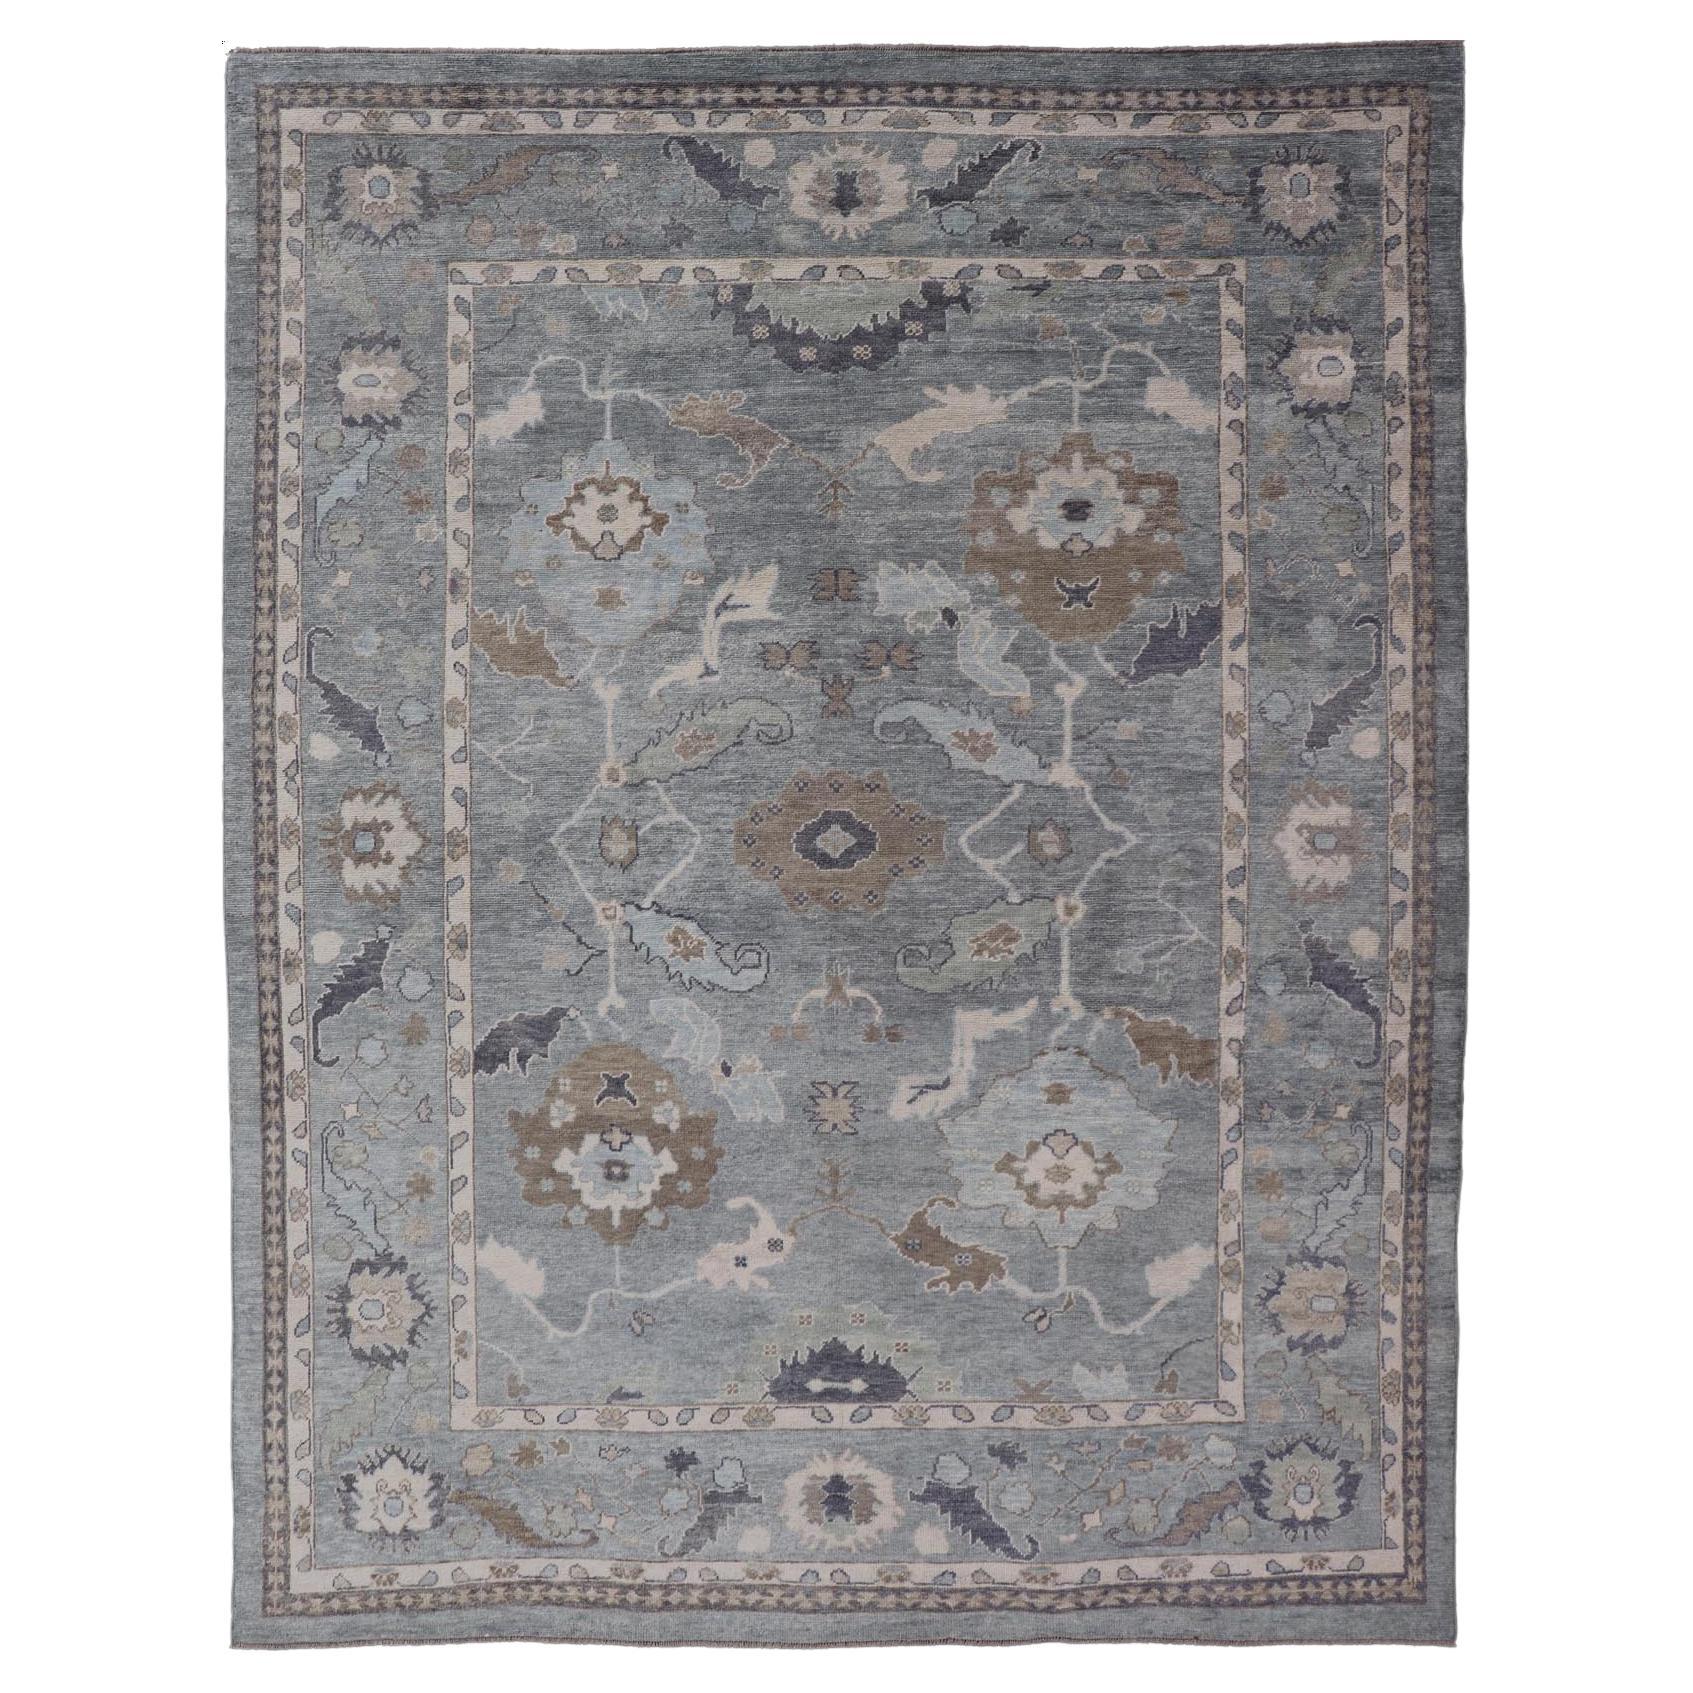 Tribal Floral Design Hand Knotted Turkish Oushak Rug with Blues and Brown